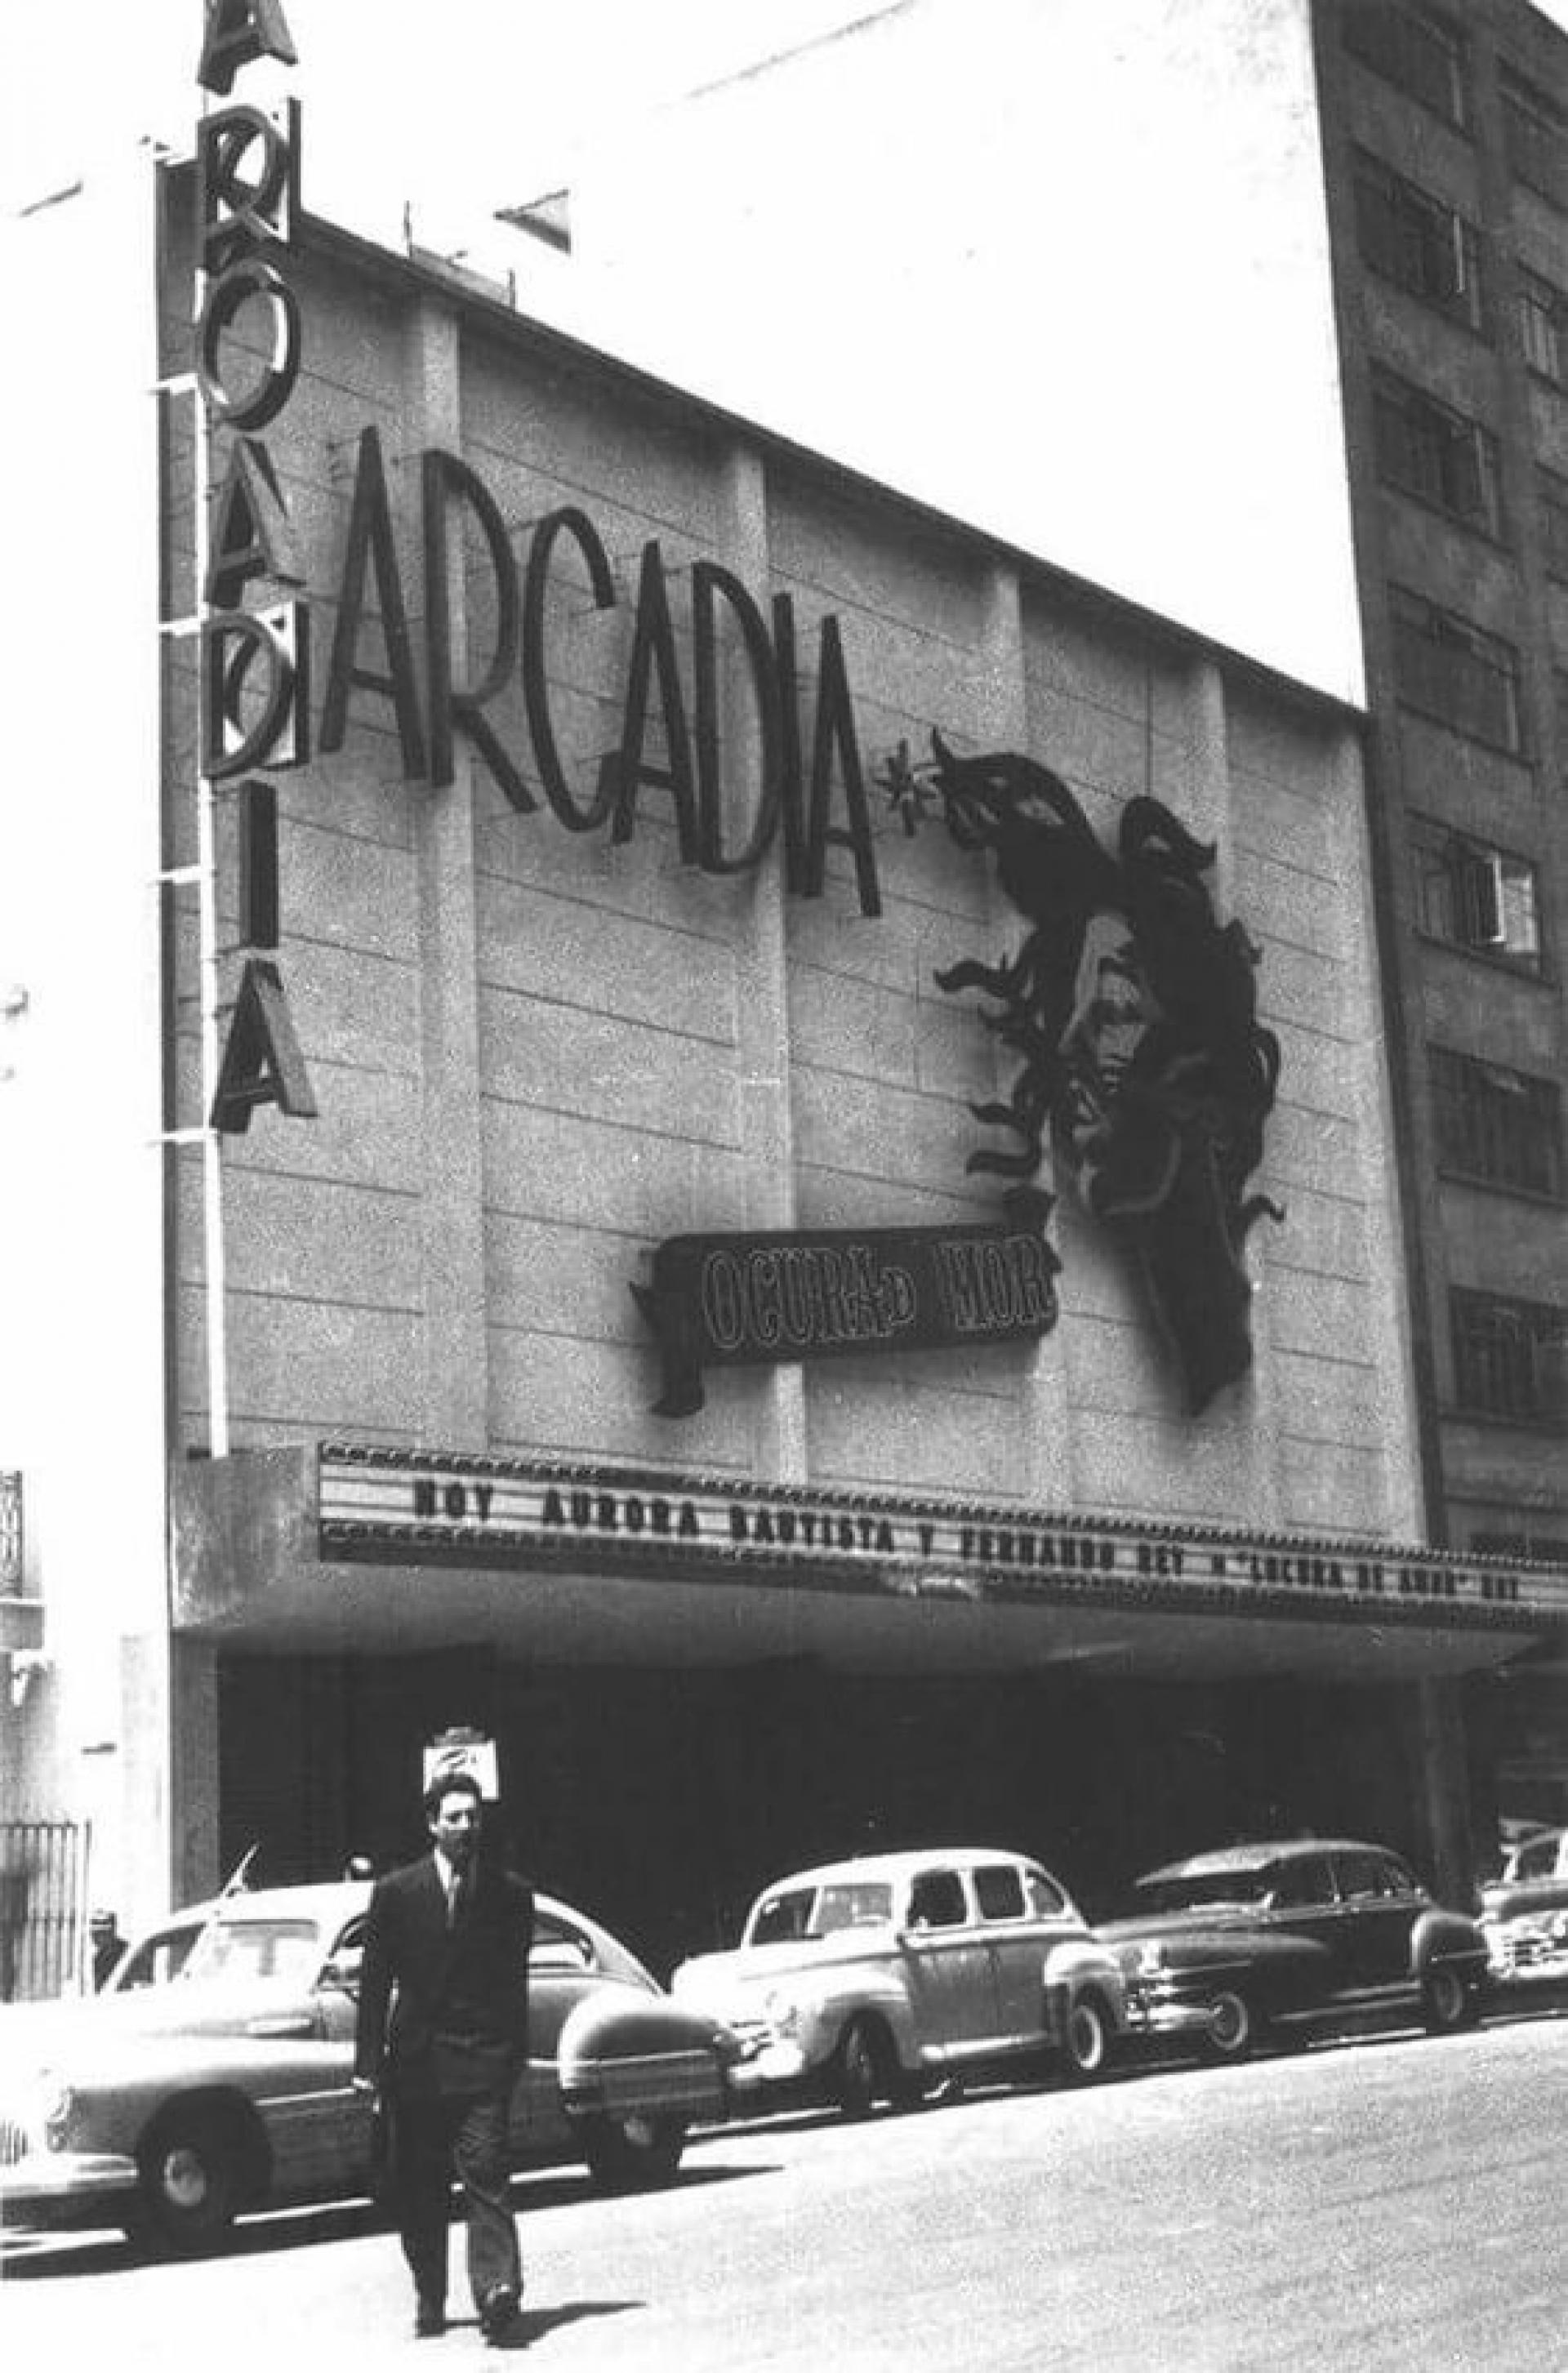 Cine Arcadia (1936). Turned into a Parking Lot. | Photo Unknown source